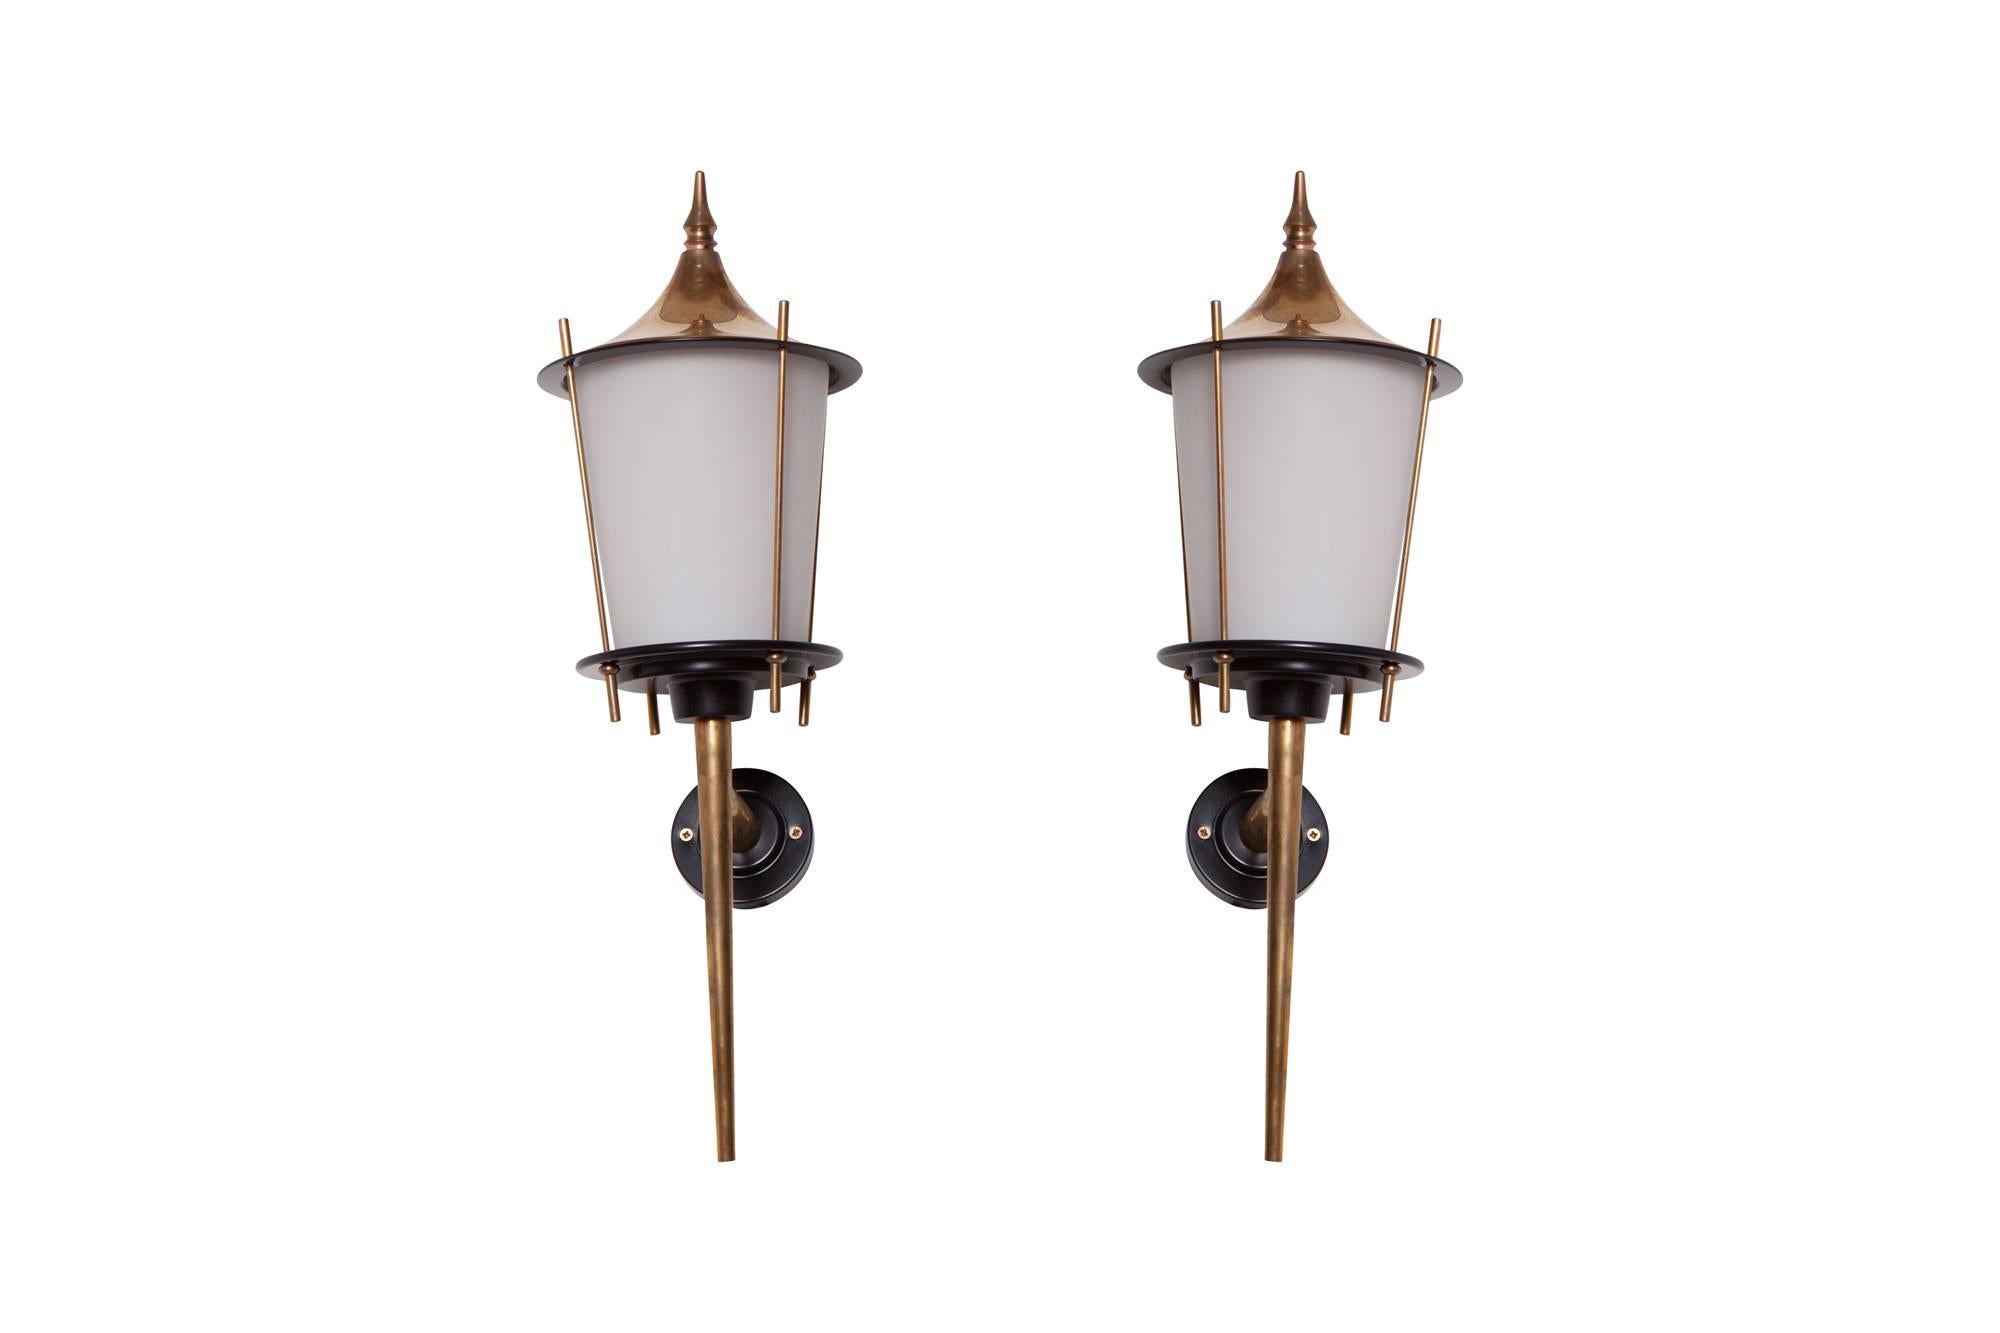 Mid-century modern brass Lantern shaped wall lights by Maison Arlus in brass and black lacquered metal, France, 1970s.
The opaline glass shades provide the light with an elegant and soft light partition. The lights are finished with brash hats to